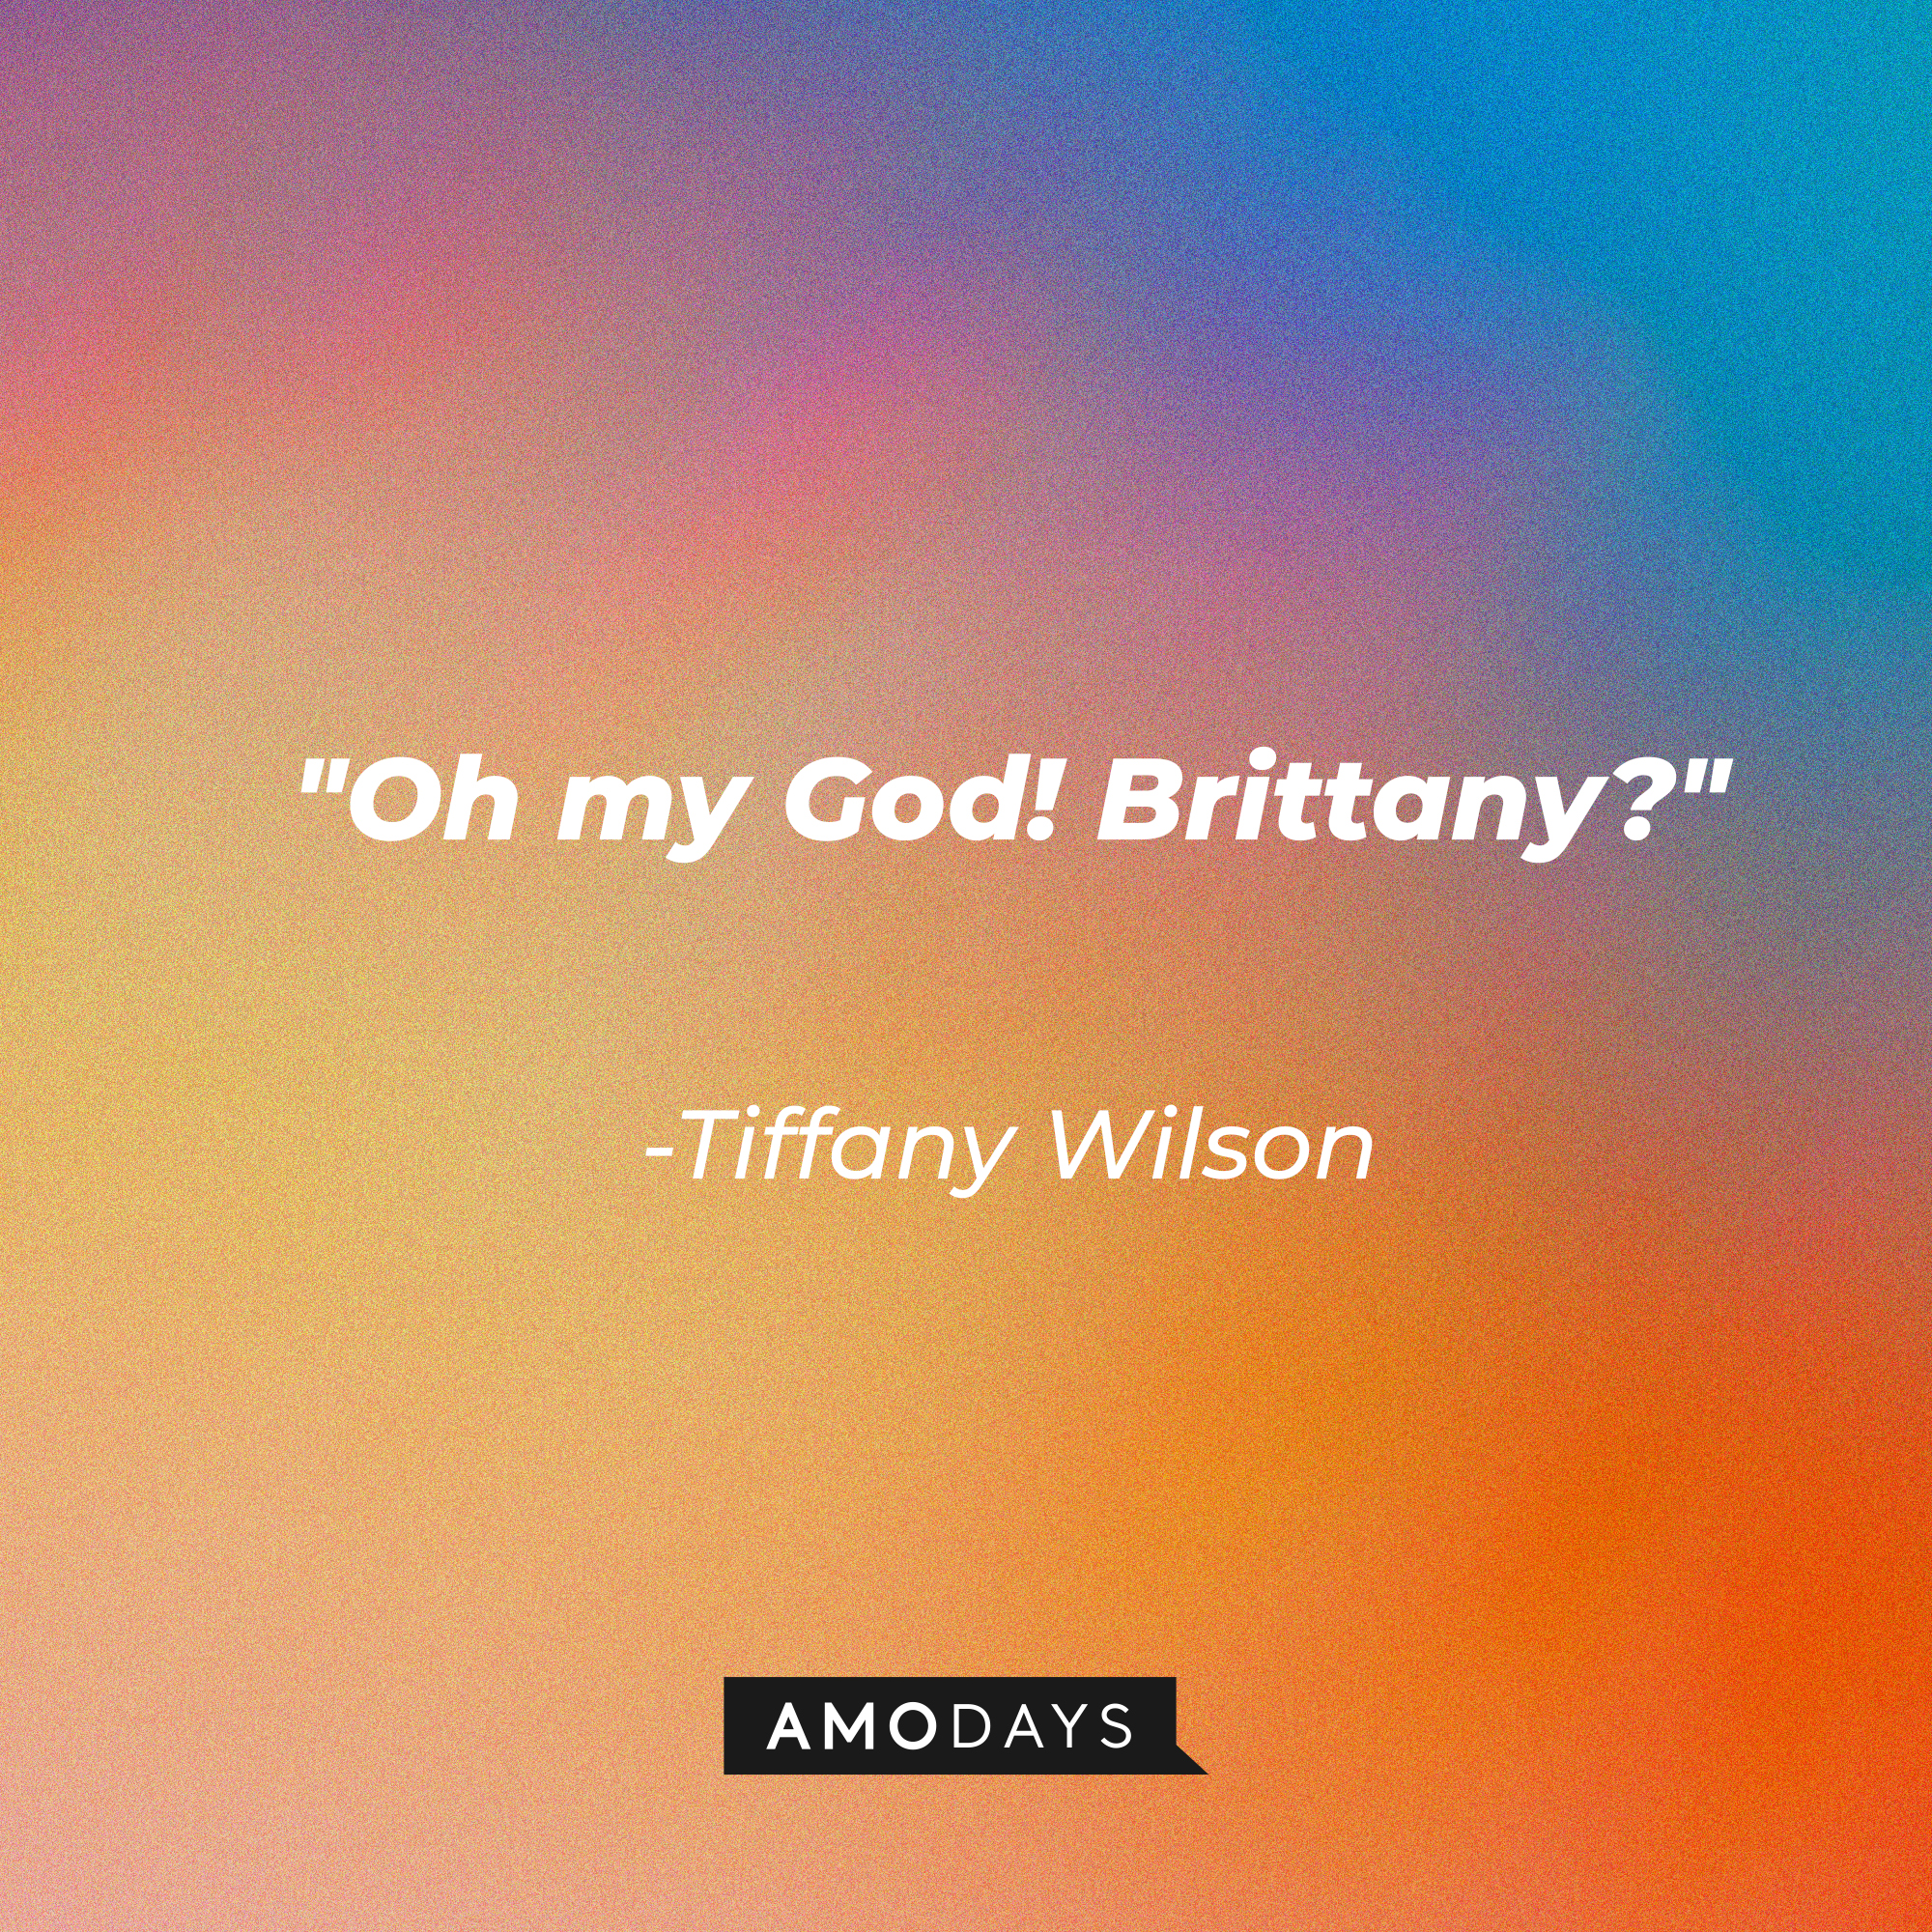 38 Tiffany Wilson White Chicks Quotes - Iconic Lines from the Film